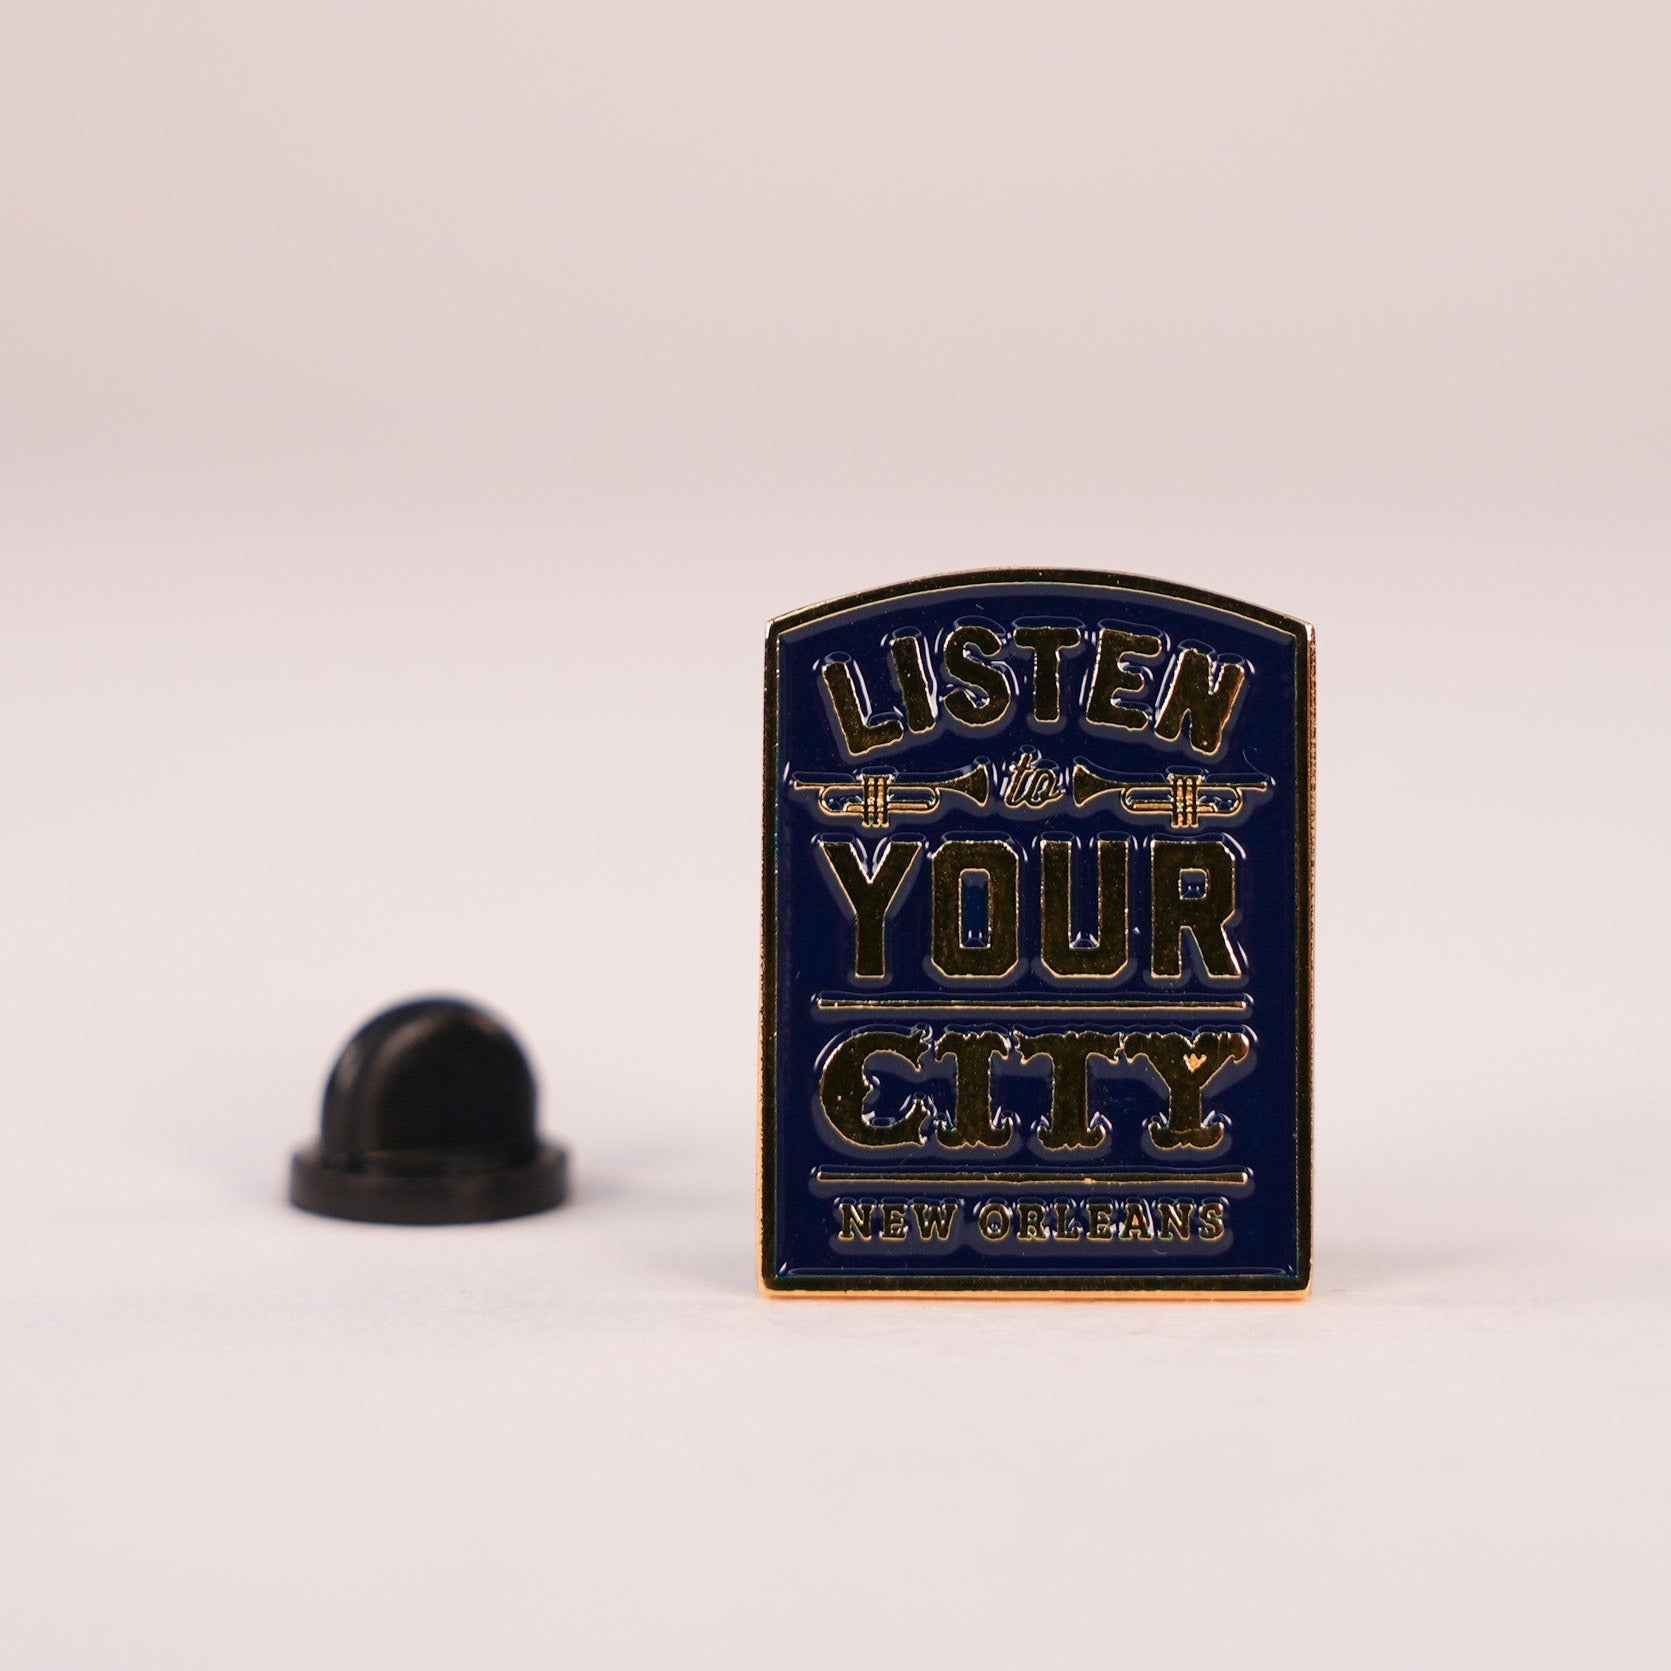 Listen To Your City Pin - Dirty Coast Press